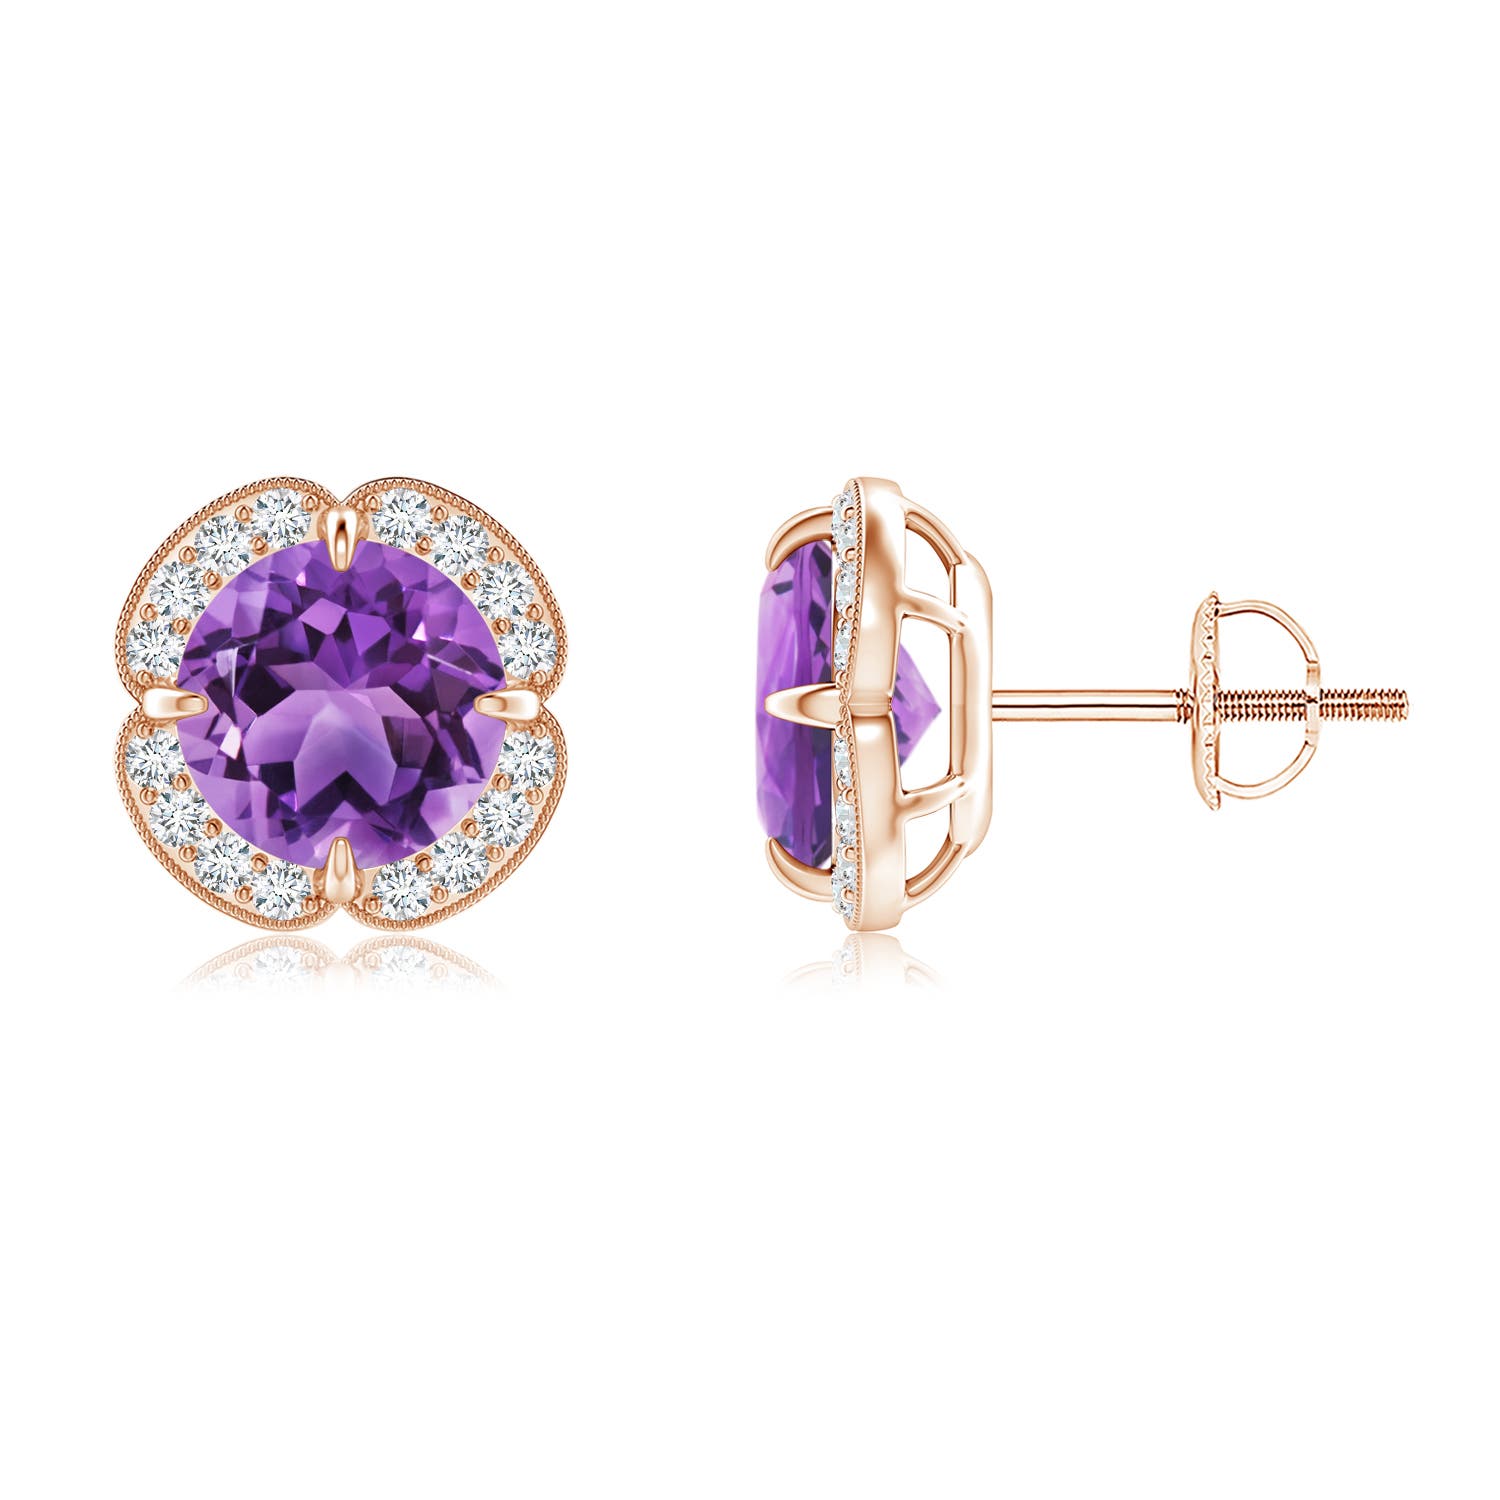 AA - Amethyst / 2.56 CT / 14 KT Rose Gold